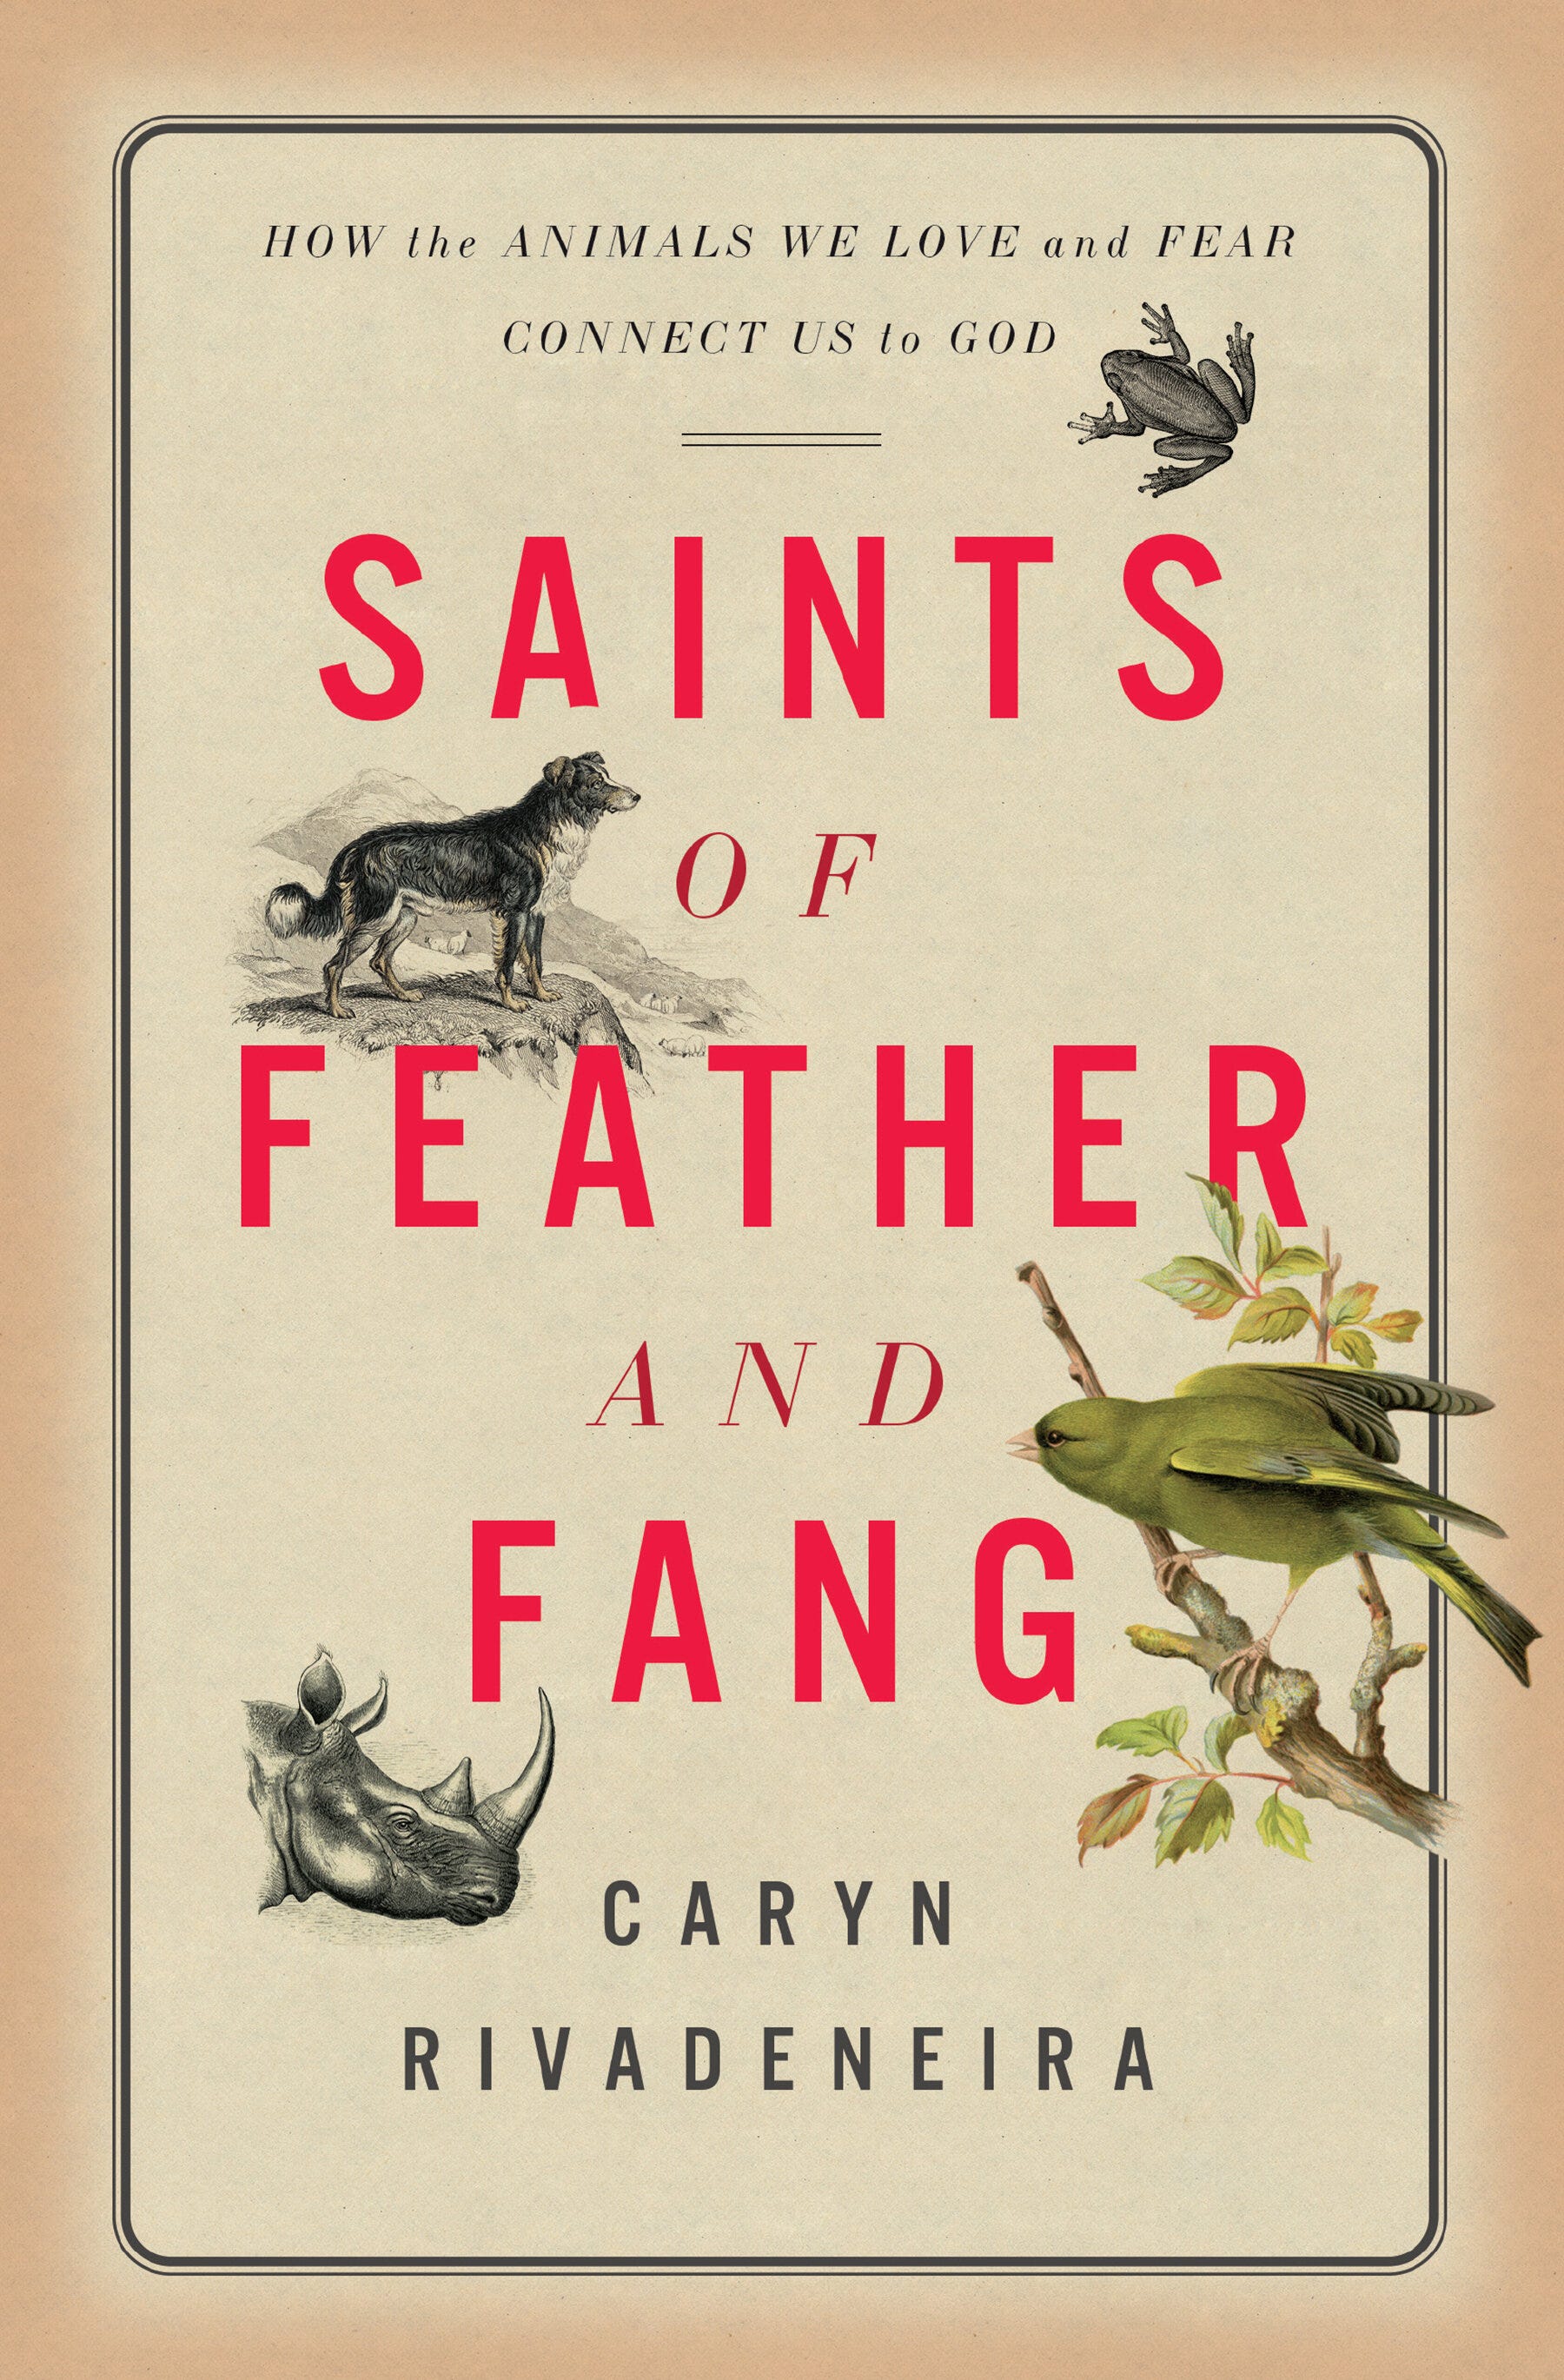 Book Review: Saints of Feather and Fang - by Gina Dalfonzo